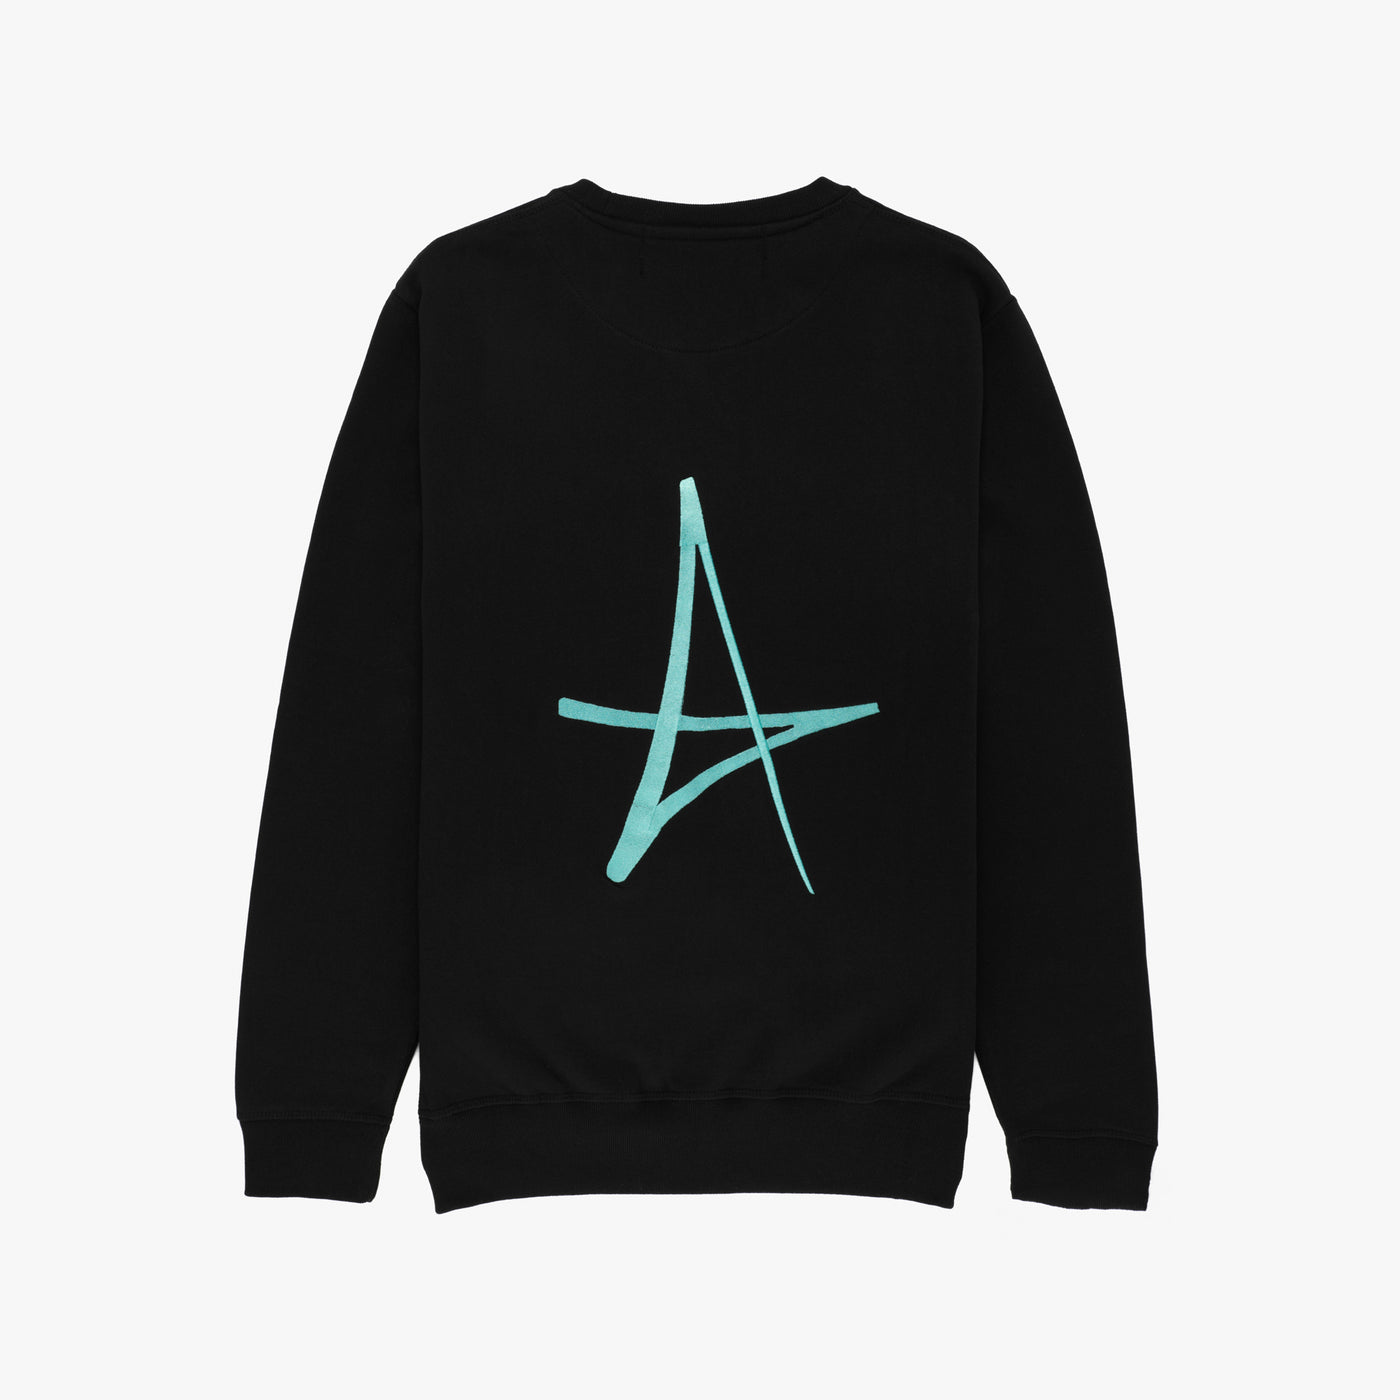 ADULTS ONLY BLACK CREWNECK “ROLL UP”